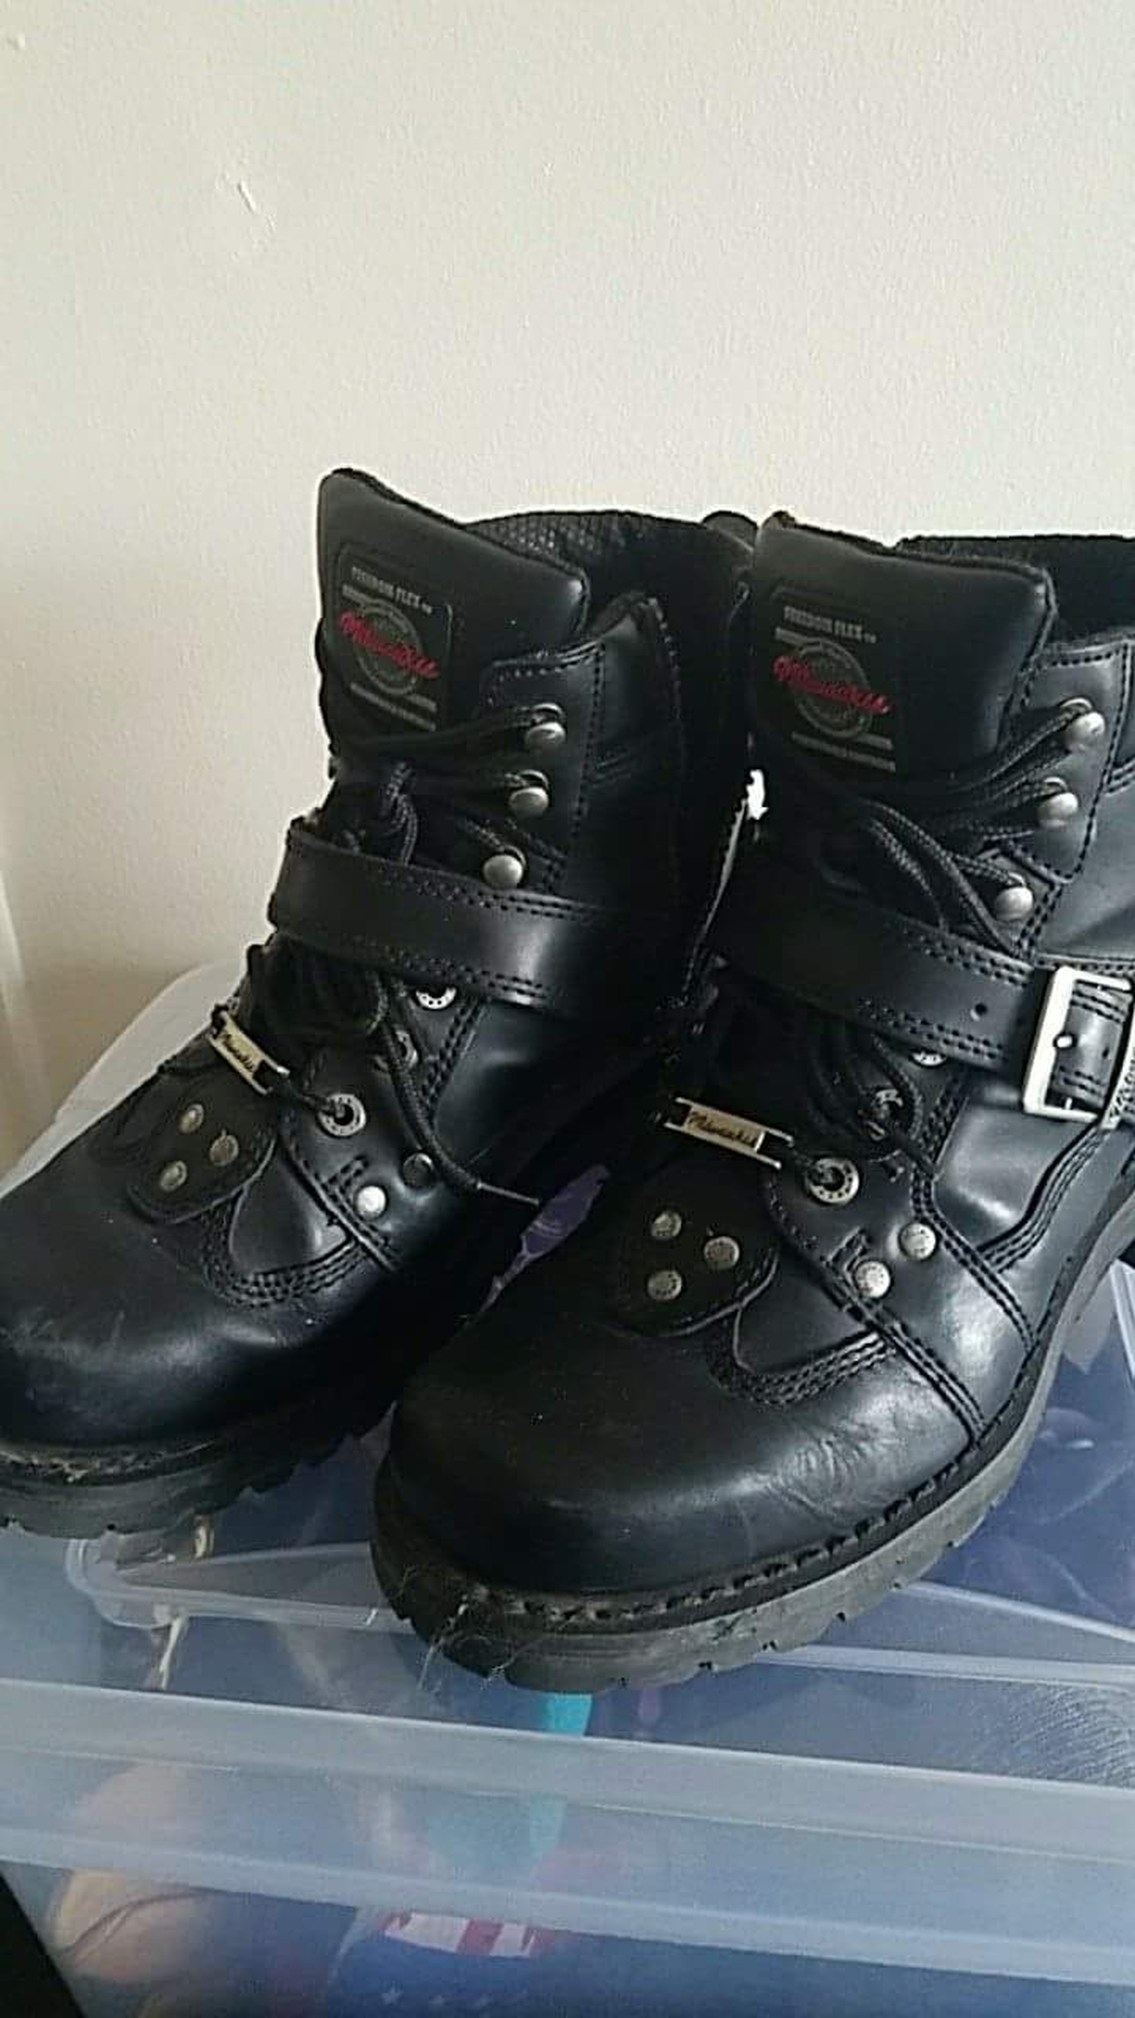 Black shiny leather Milwaukee brand boots with speed lace hooks on the uppers, pictured sitting atop a clear storage bin.